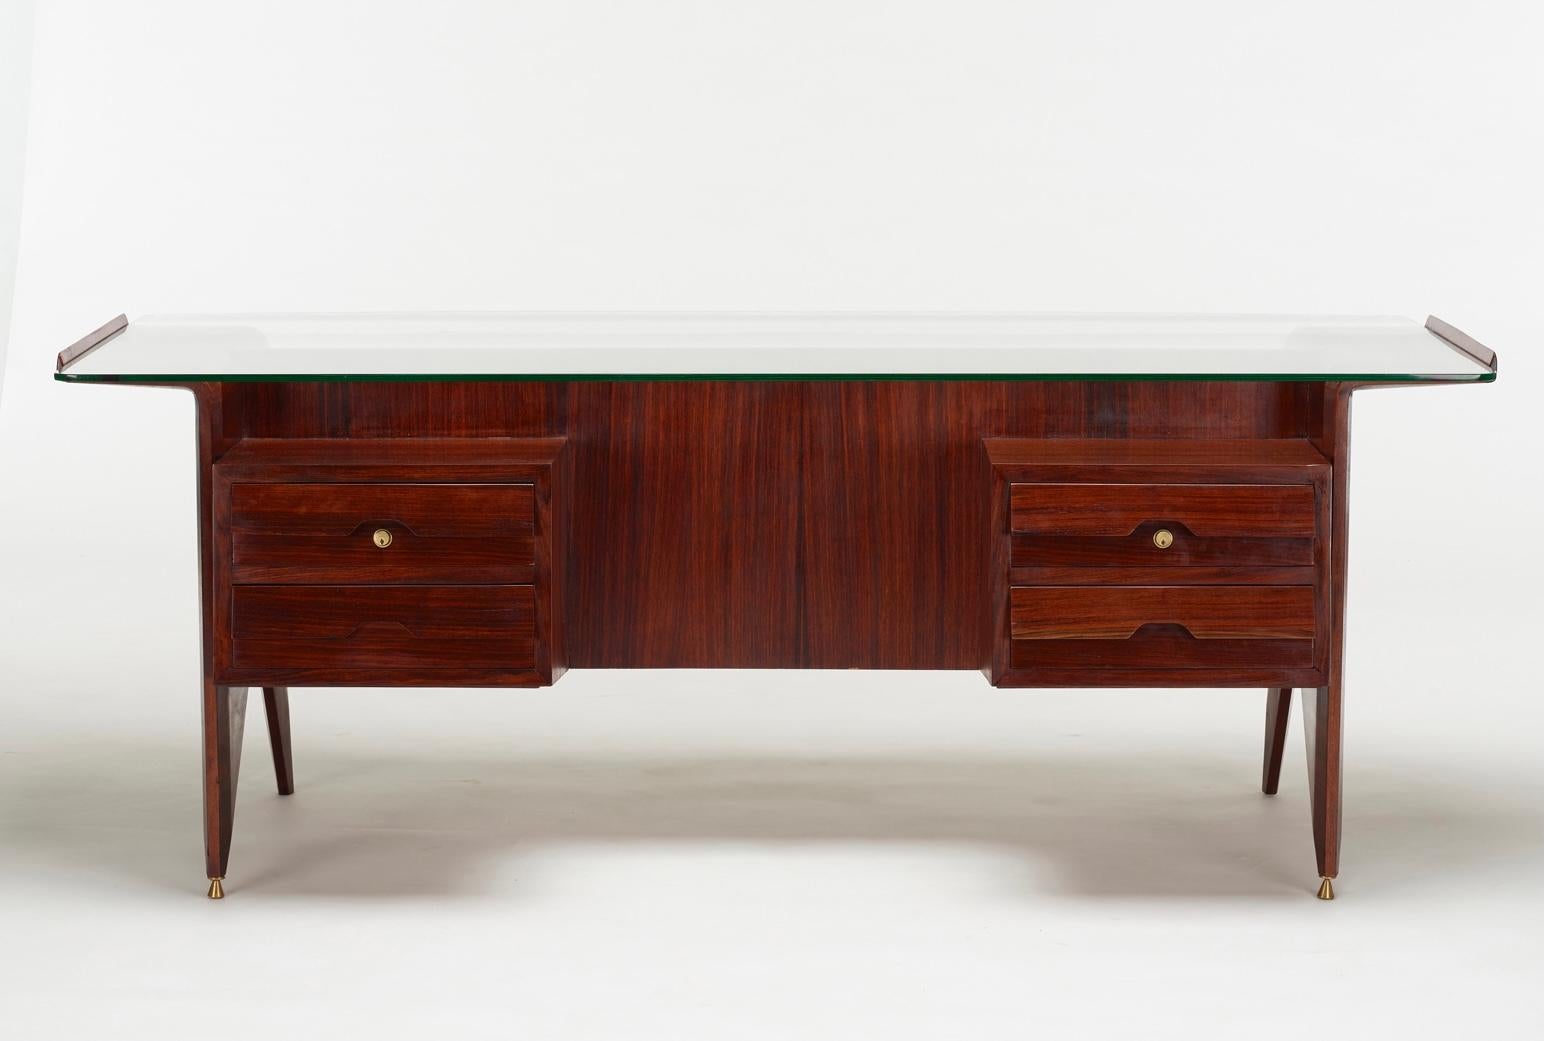 Brass Important Desk by Gio Ponti for the offices of Fontana Arte.